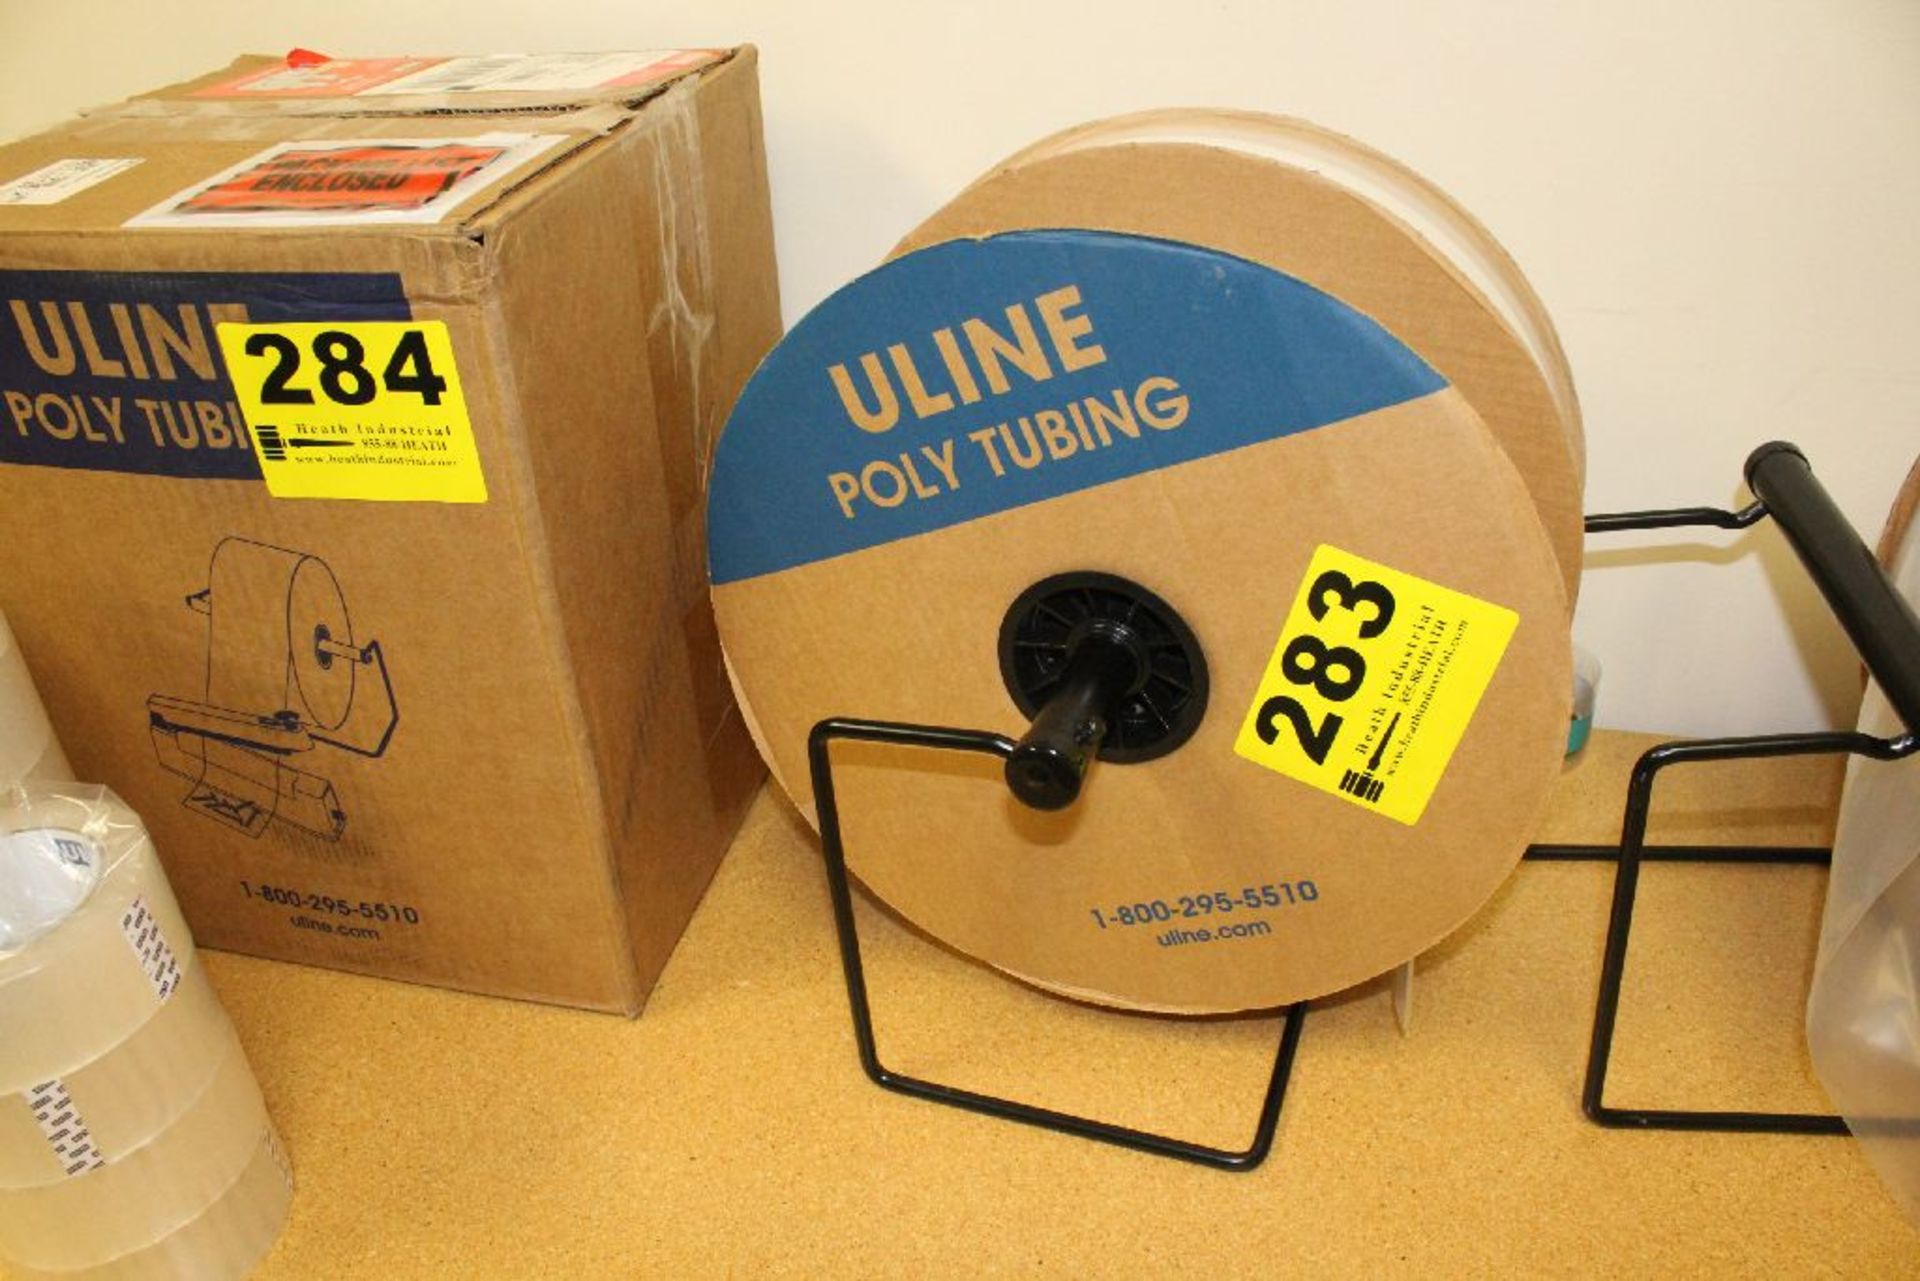 LOT OF ULINE 4" 4-MIL POLY TUBING AND 2" 4-MIL POLY TUBING WITH STAND